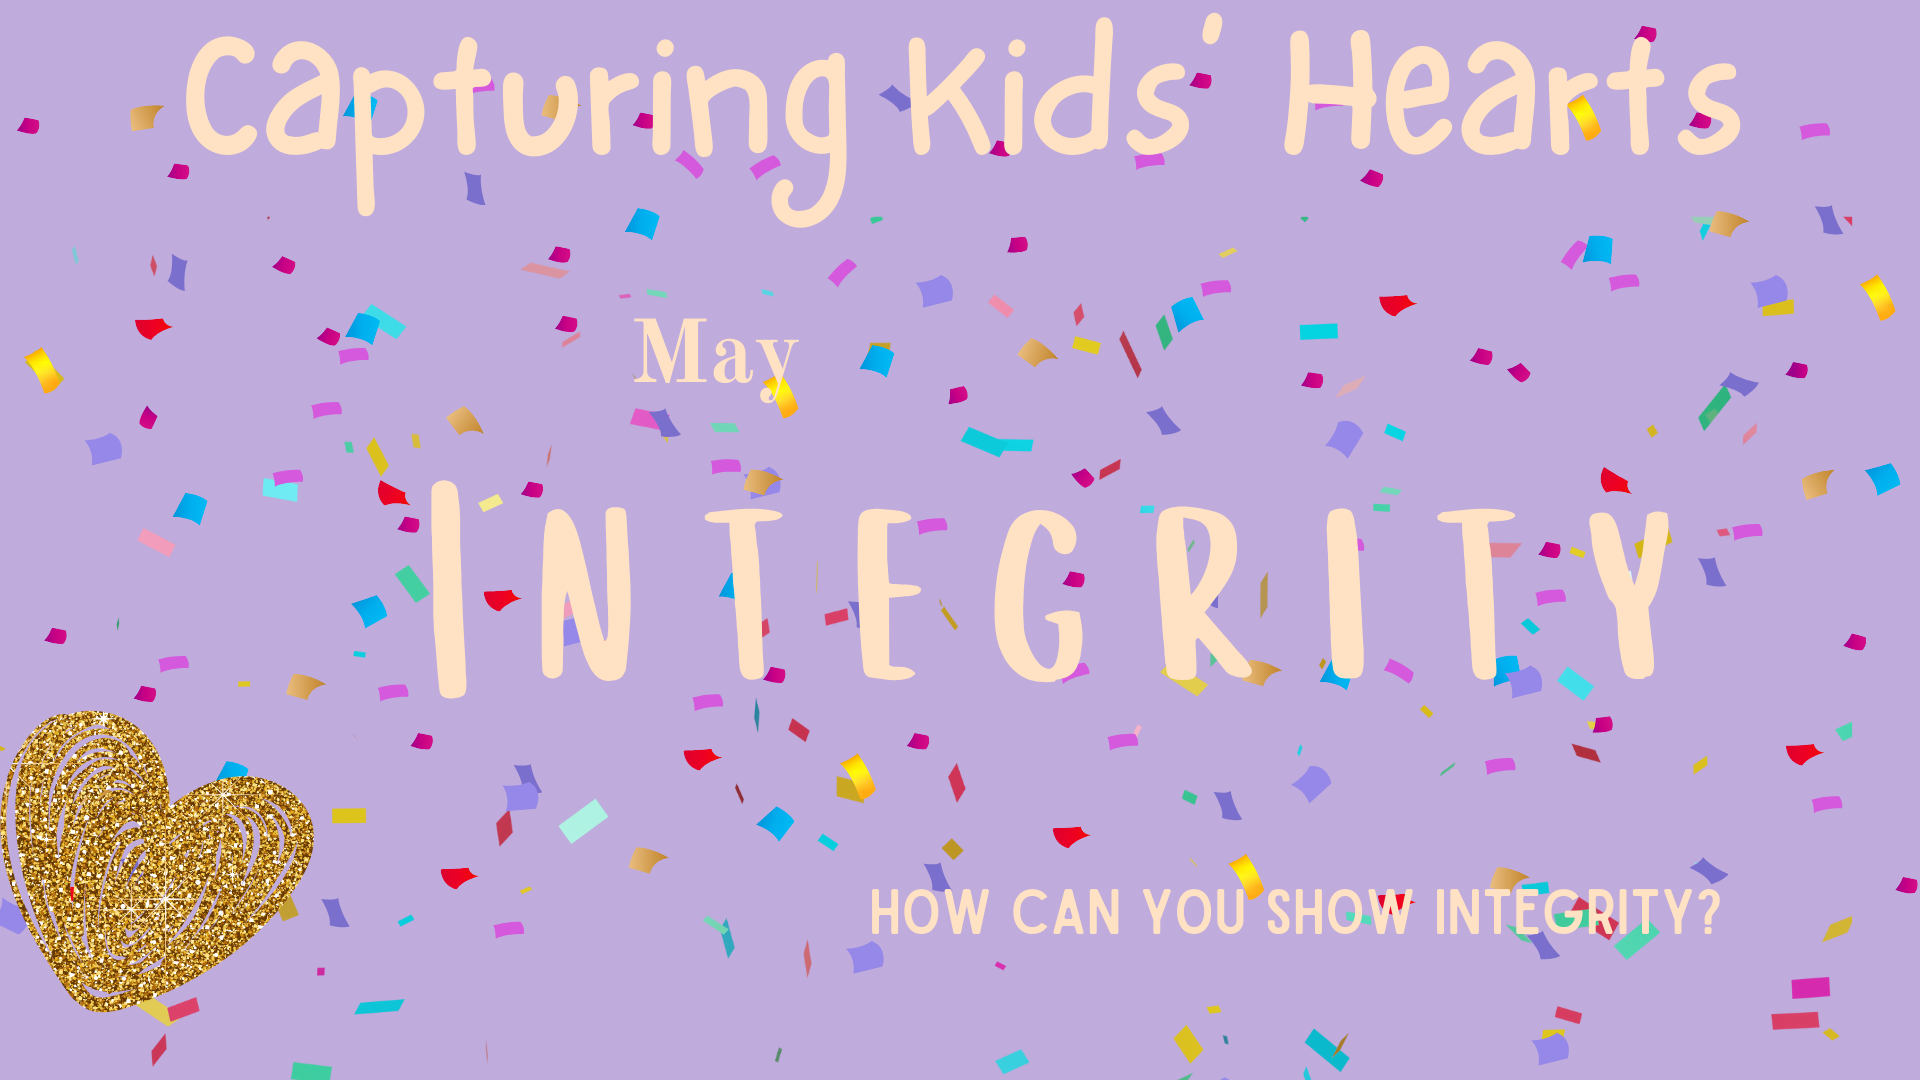 Capturing Kids' Hearts-Integrity